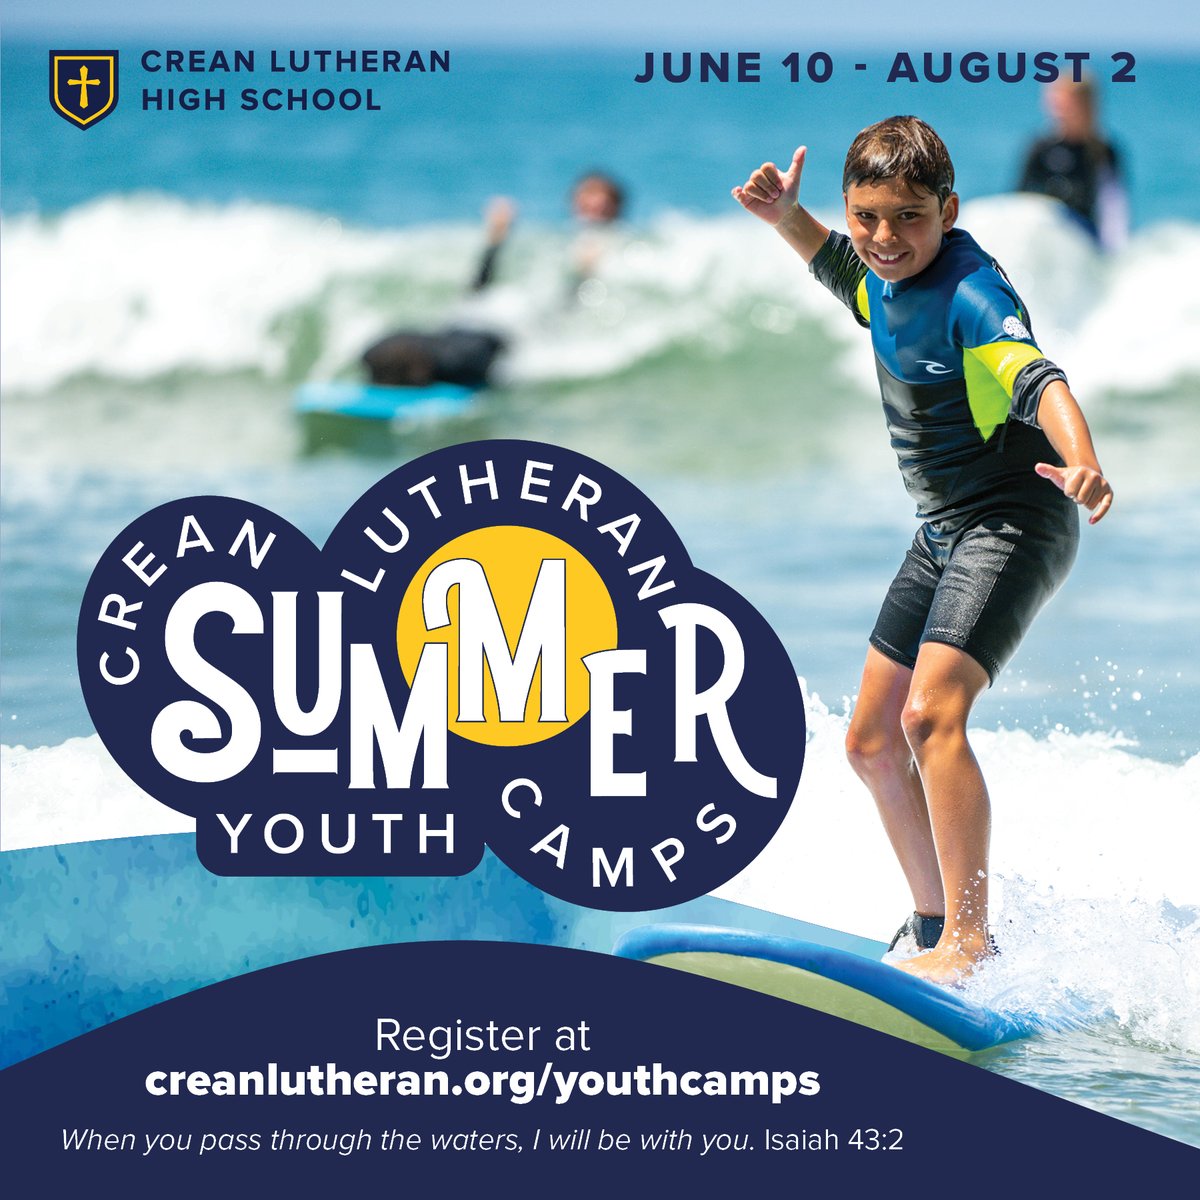 Crean Lutheran High School offers Athletic, Academic, and Arts Summer Youth Camps for kids entering grades K-8. Camps start in June and end in August with camps that last a whole week! Isaiah 43:2